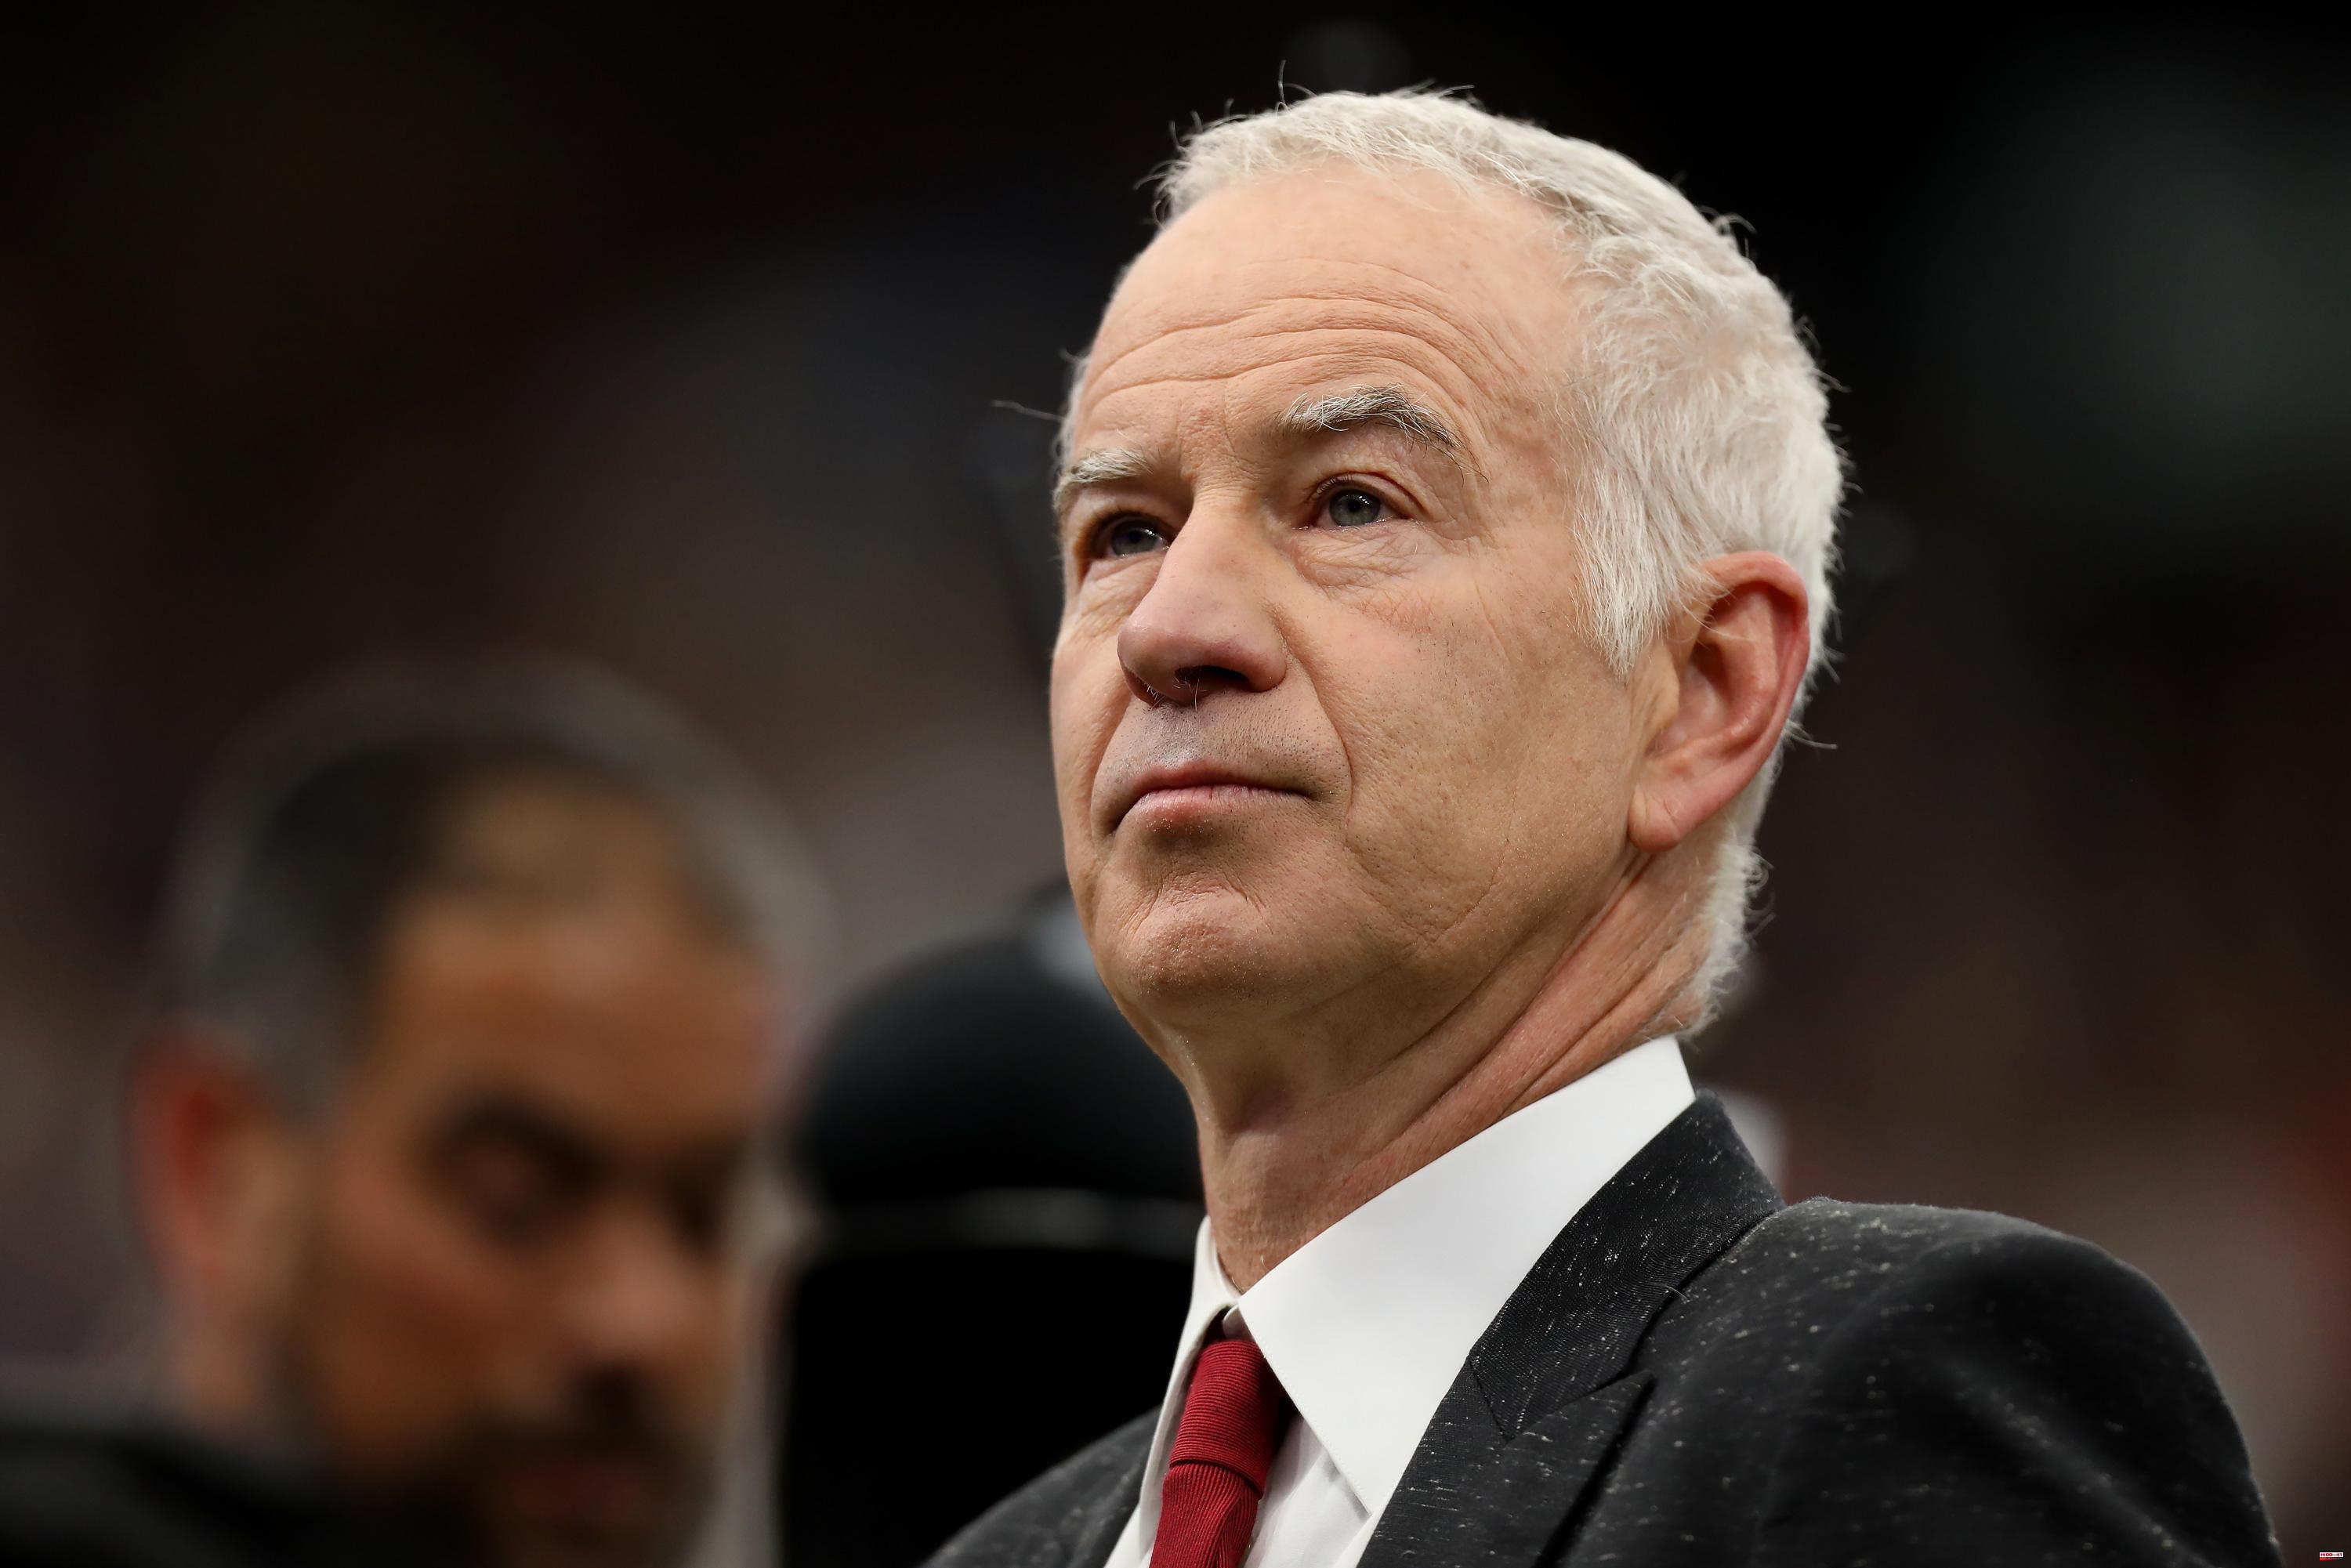 Tennis: John McEnroe evokes a boycott of Wimbledon after the exclusion of Russian and Belarusian players